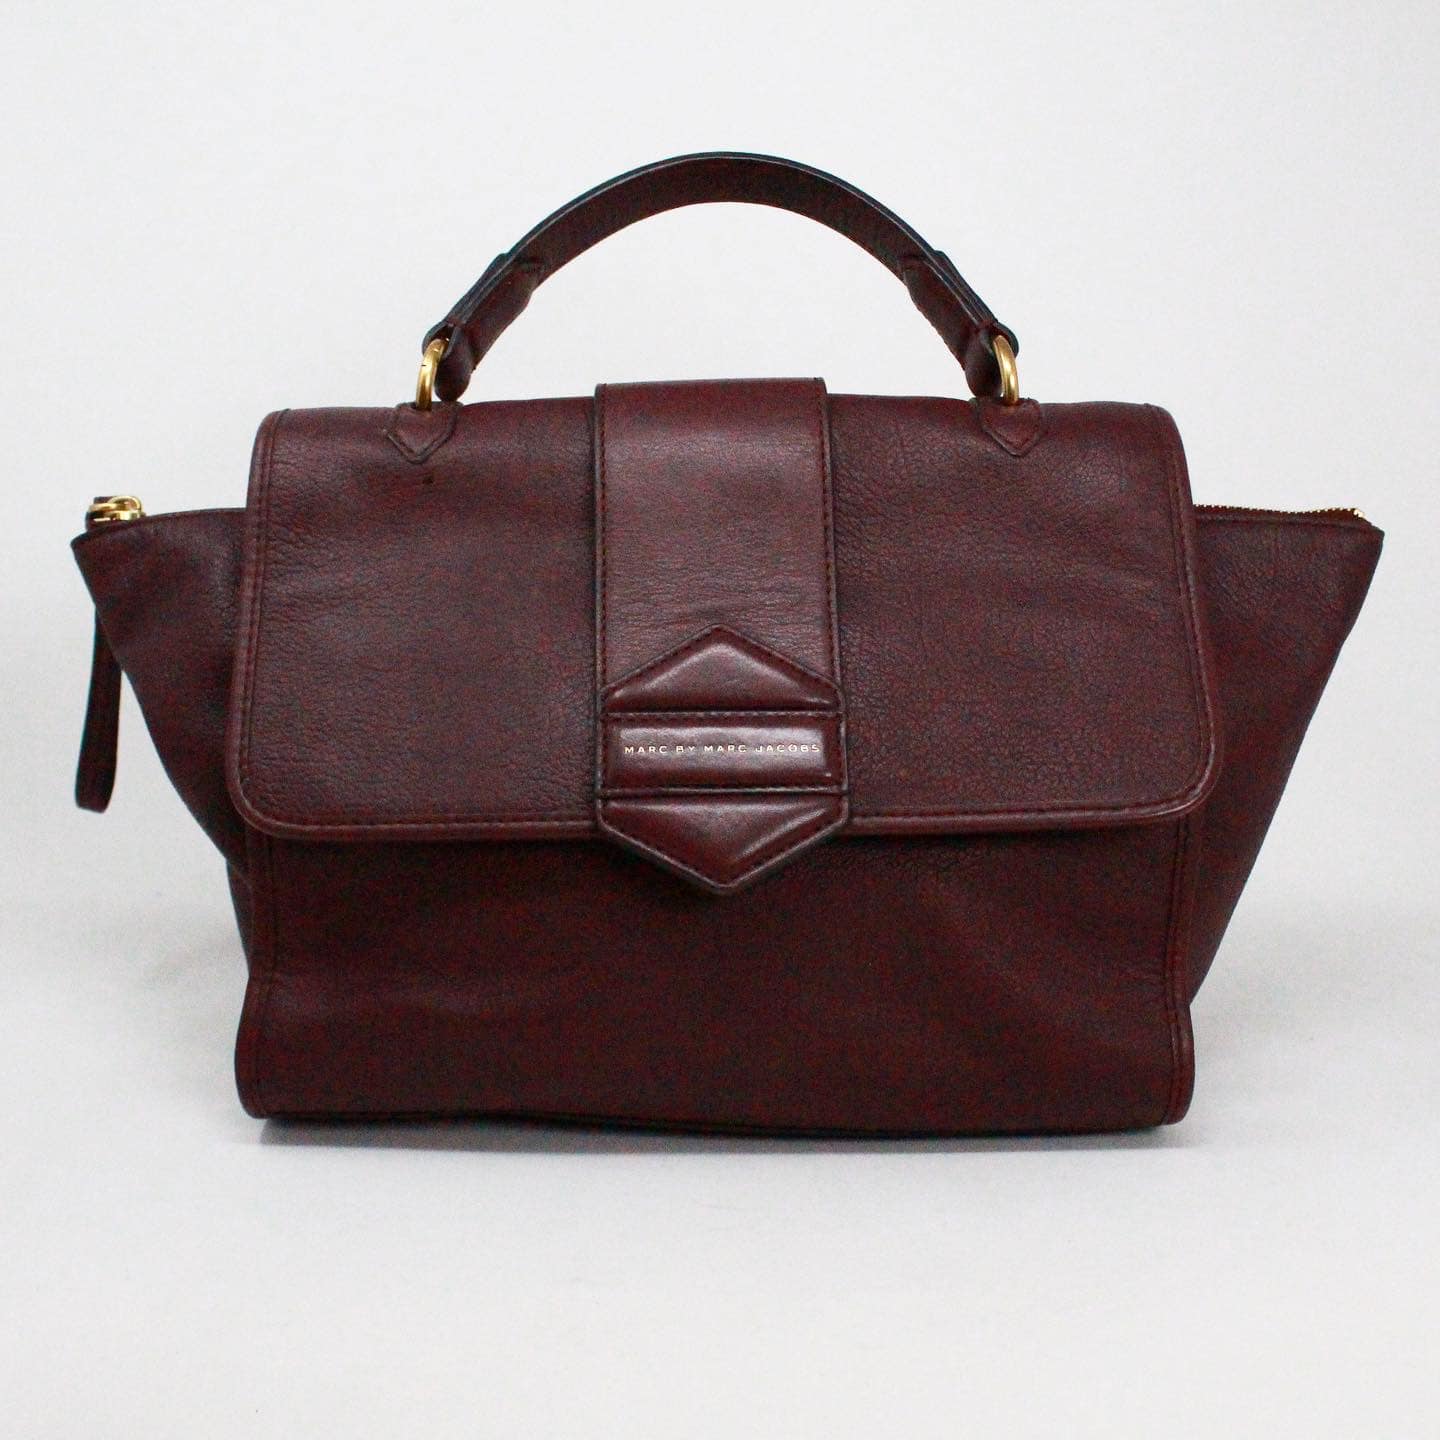 MARC BY MARC JACOBS #42288 Plum Leather Top Handle Satchel with Strap 1